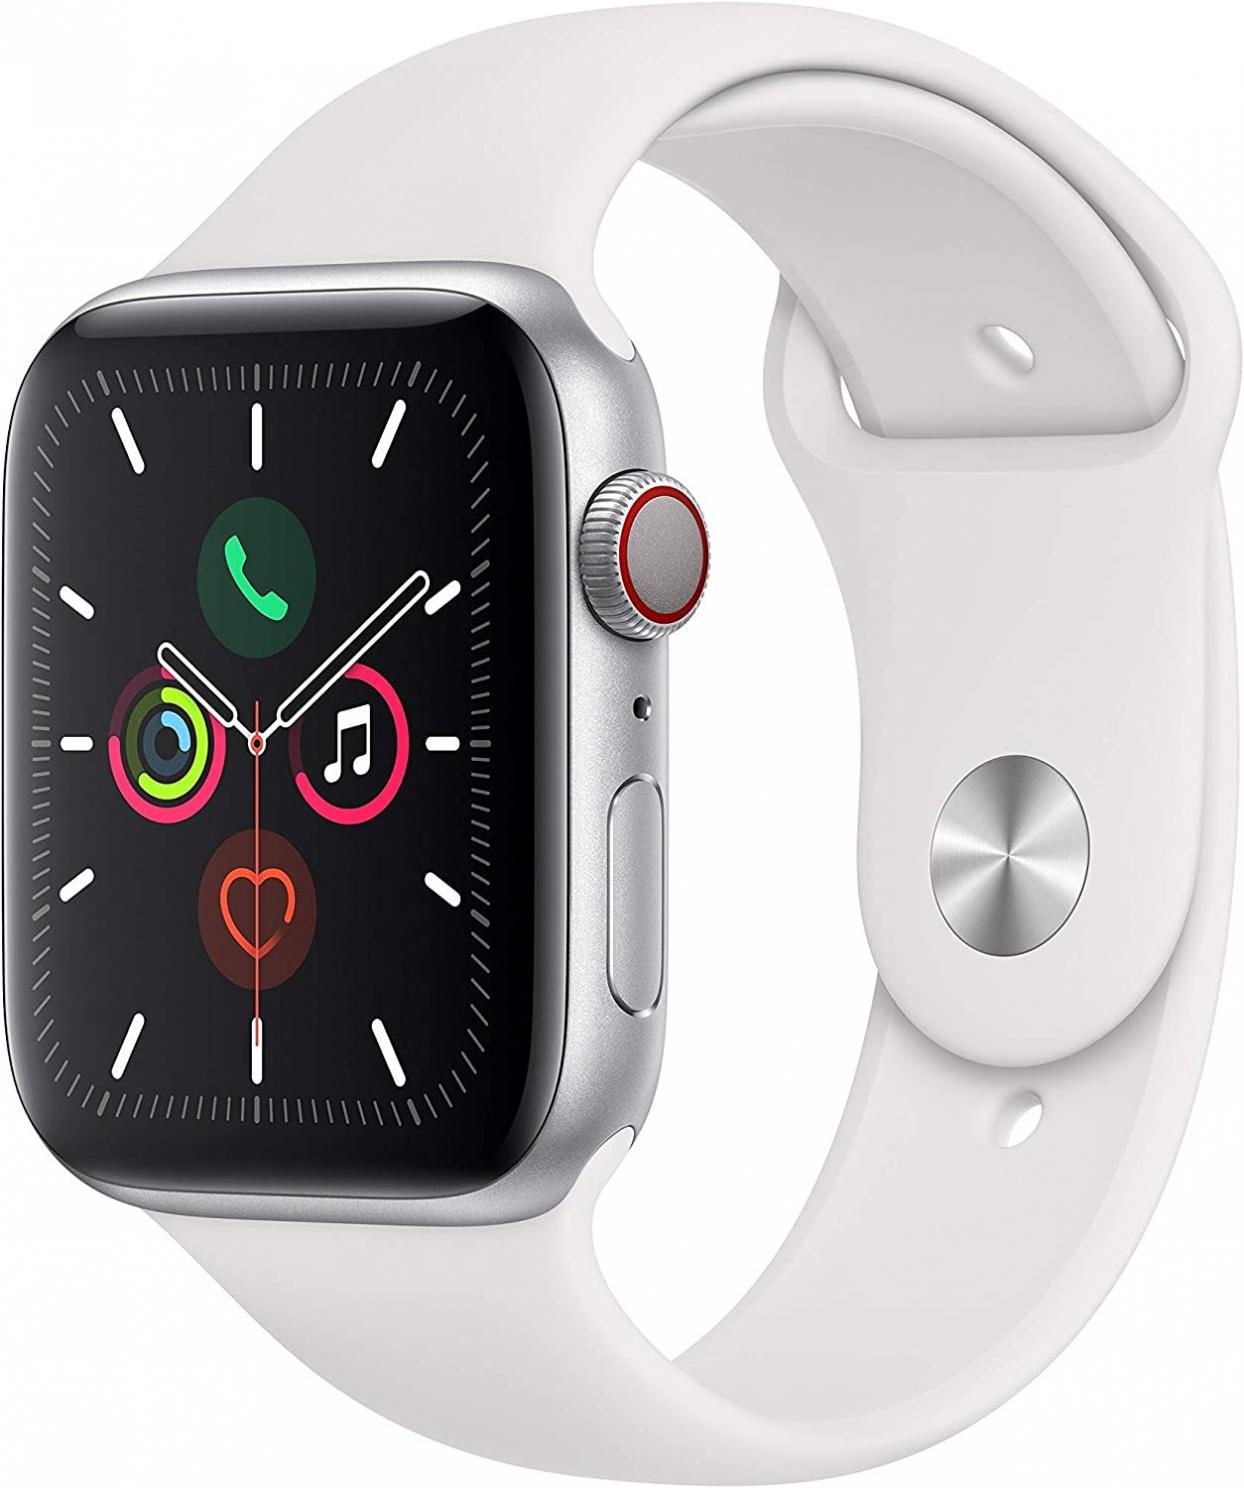 Apple Watch Series 5 (GPS + Cellular, 44MM) Silver Aluminum Case with White Sport Band (Renewed)